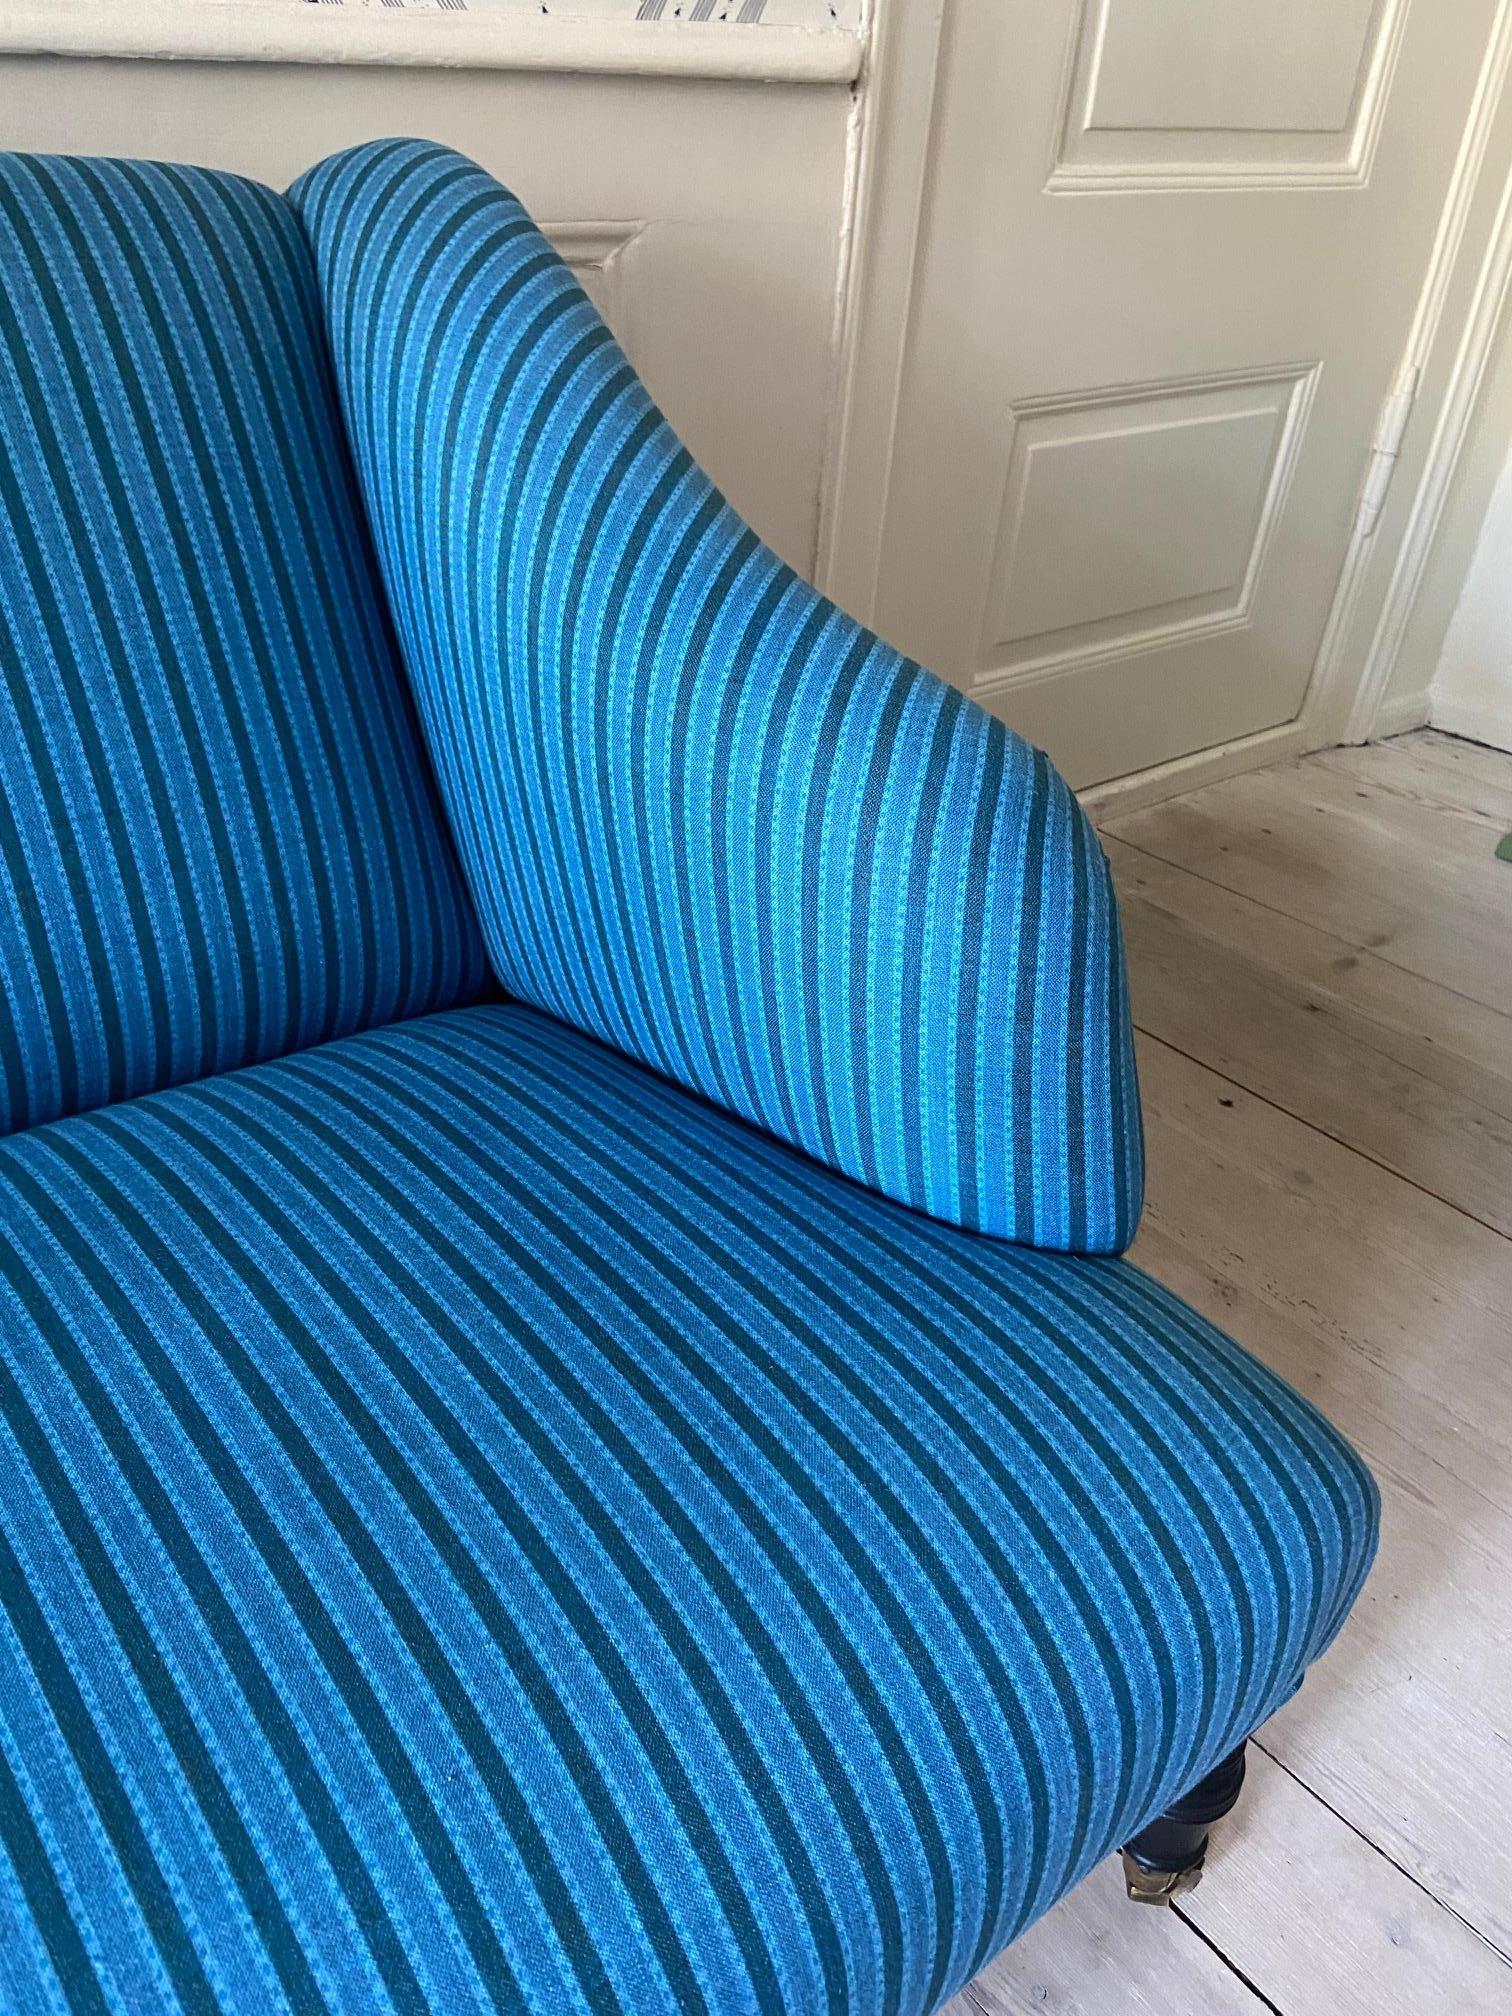 Textile Contemporary Sofa in Customized Blue Upholstery by the Apartment, Belgium, 2020 For Sale